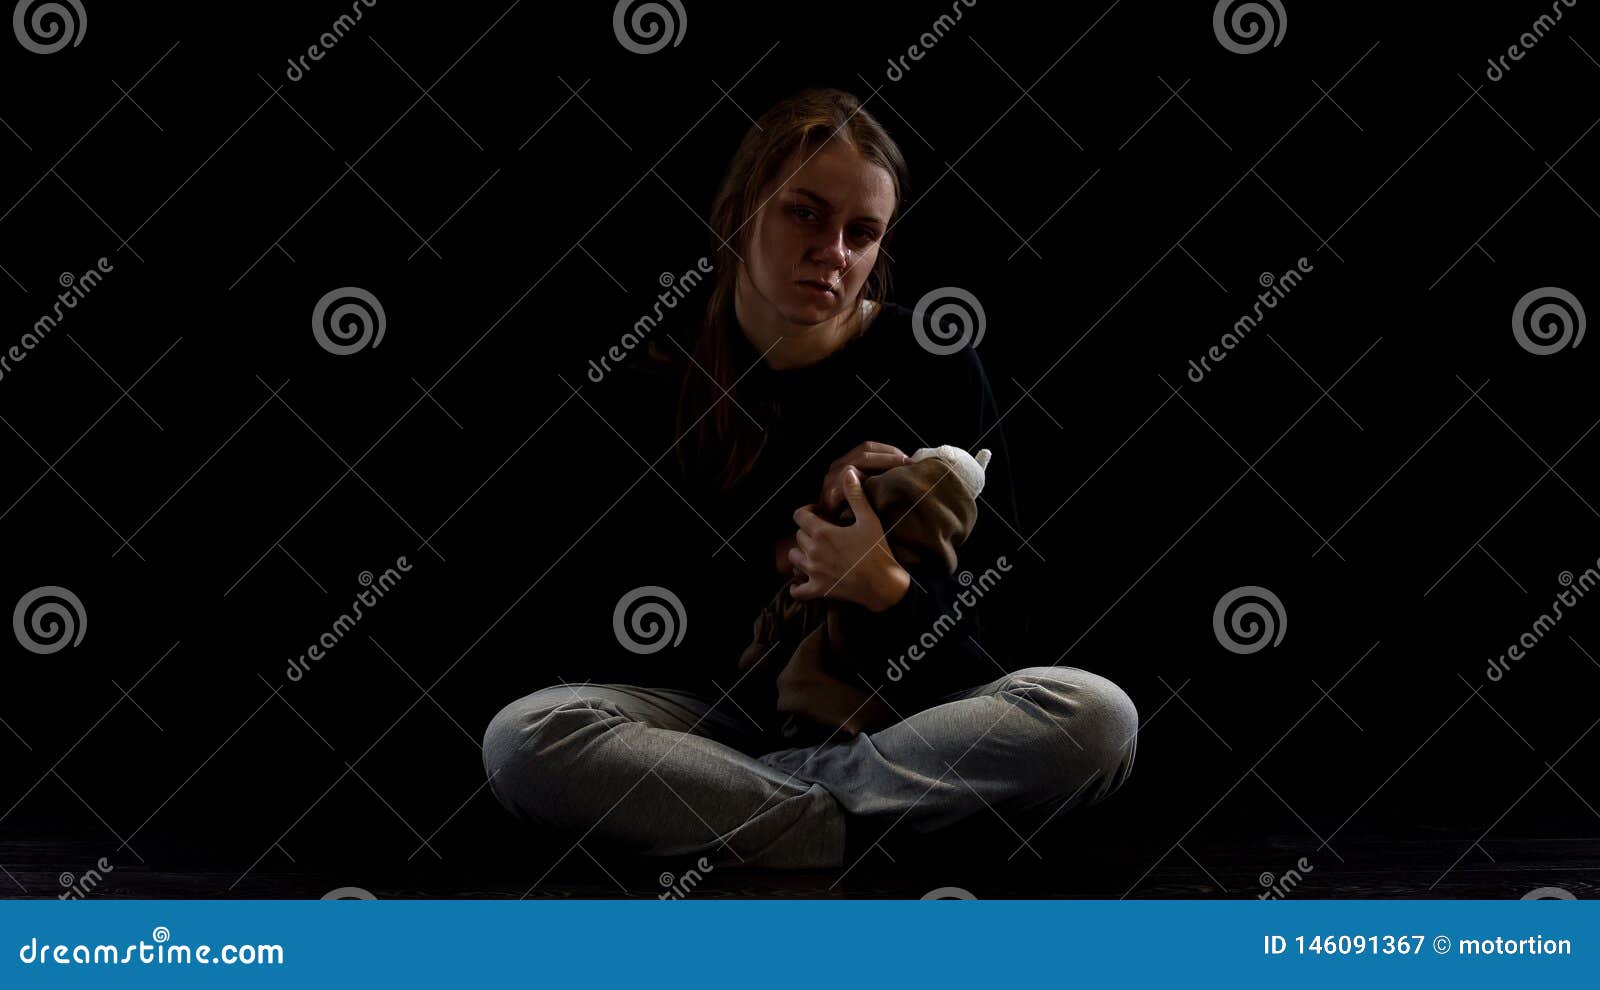 crying depressed lady hugging teddy bear in darkness, obstetric violence victim